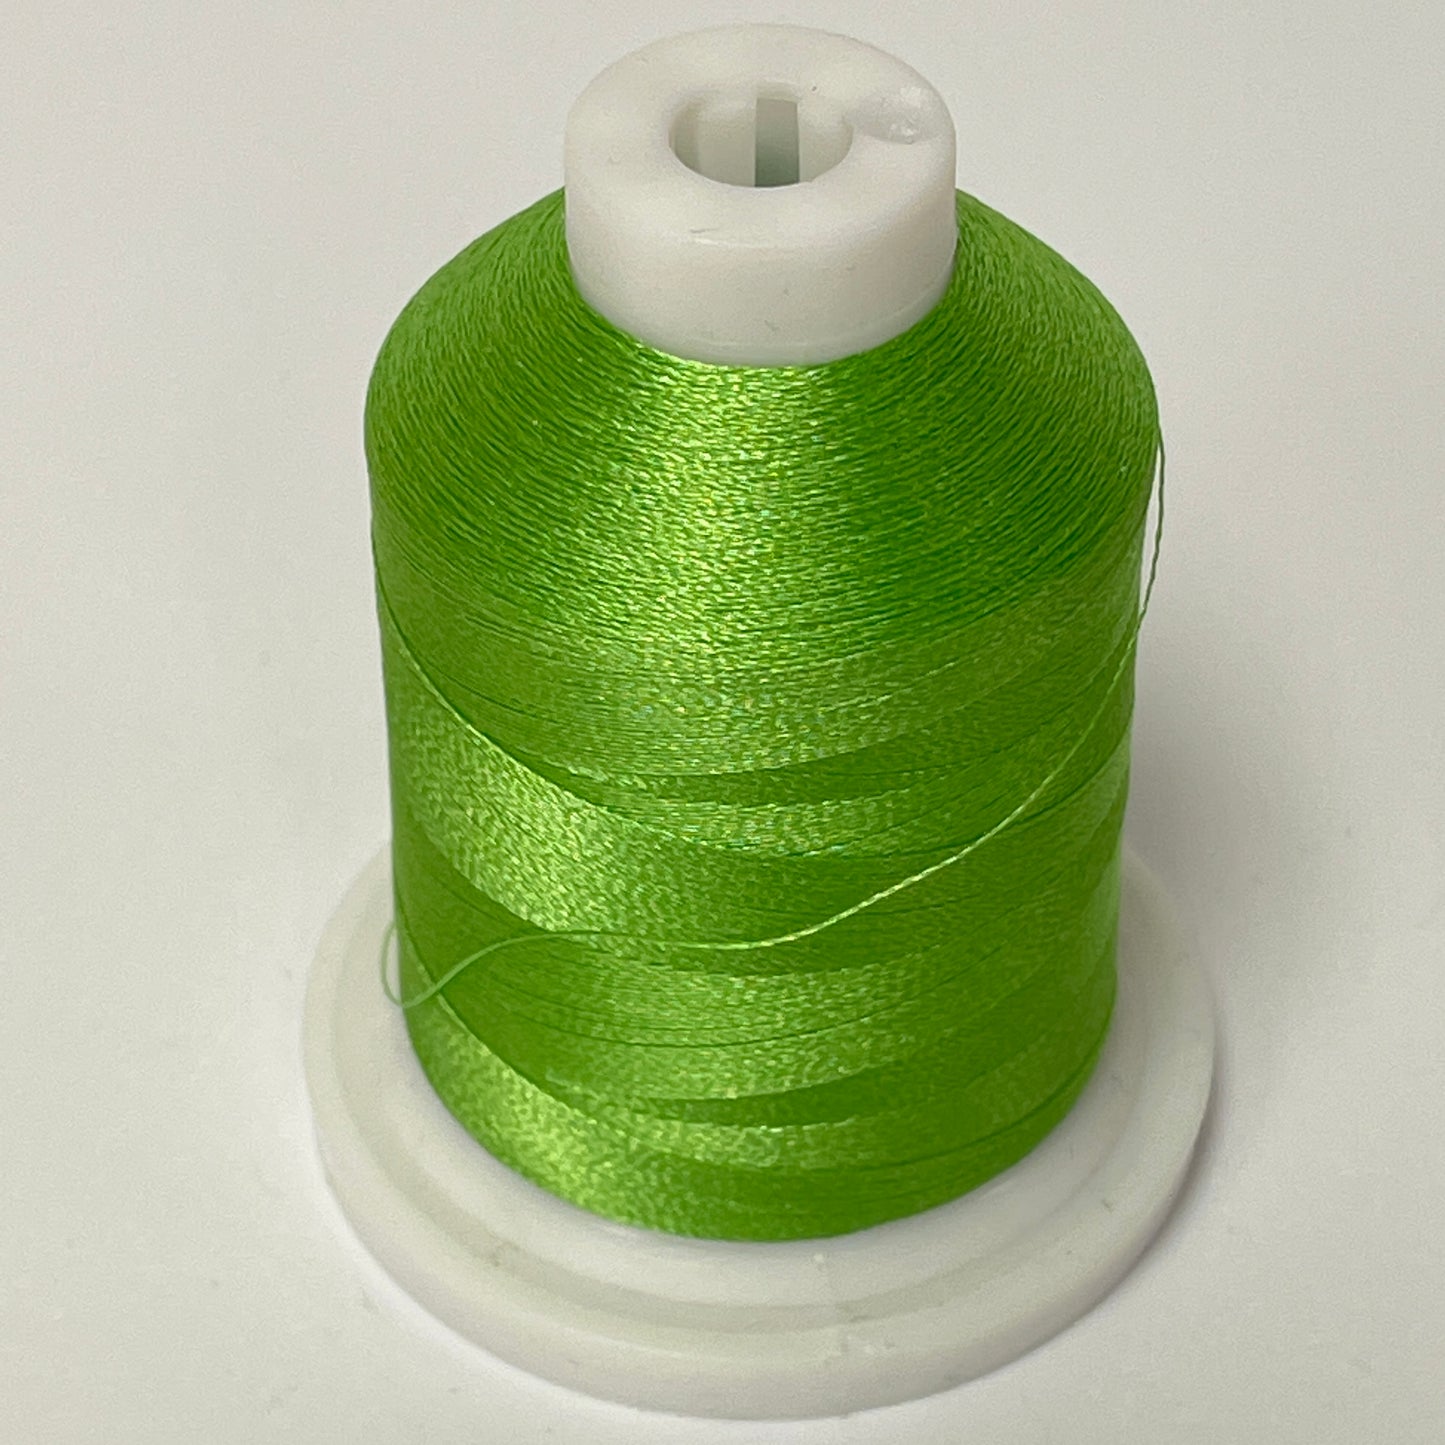 Brother Pacesetter Embroidery Thread - Greens